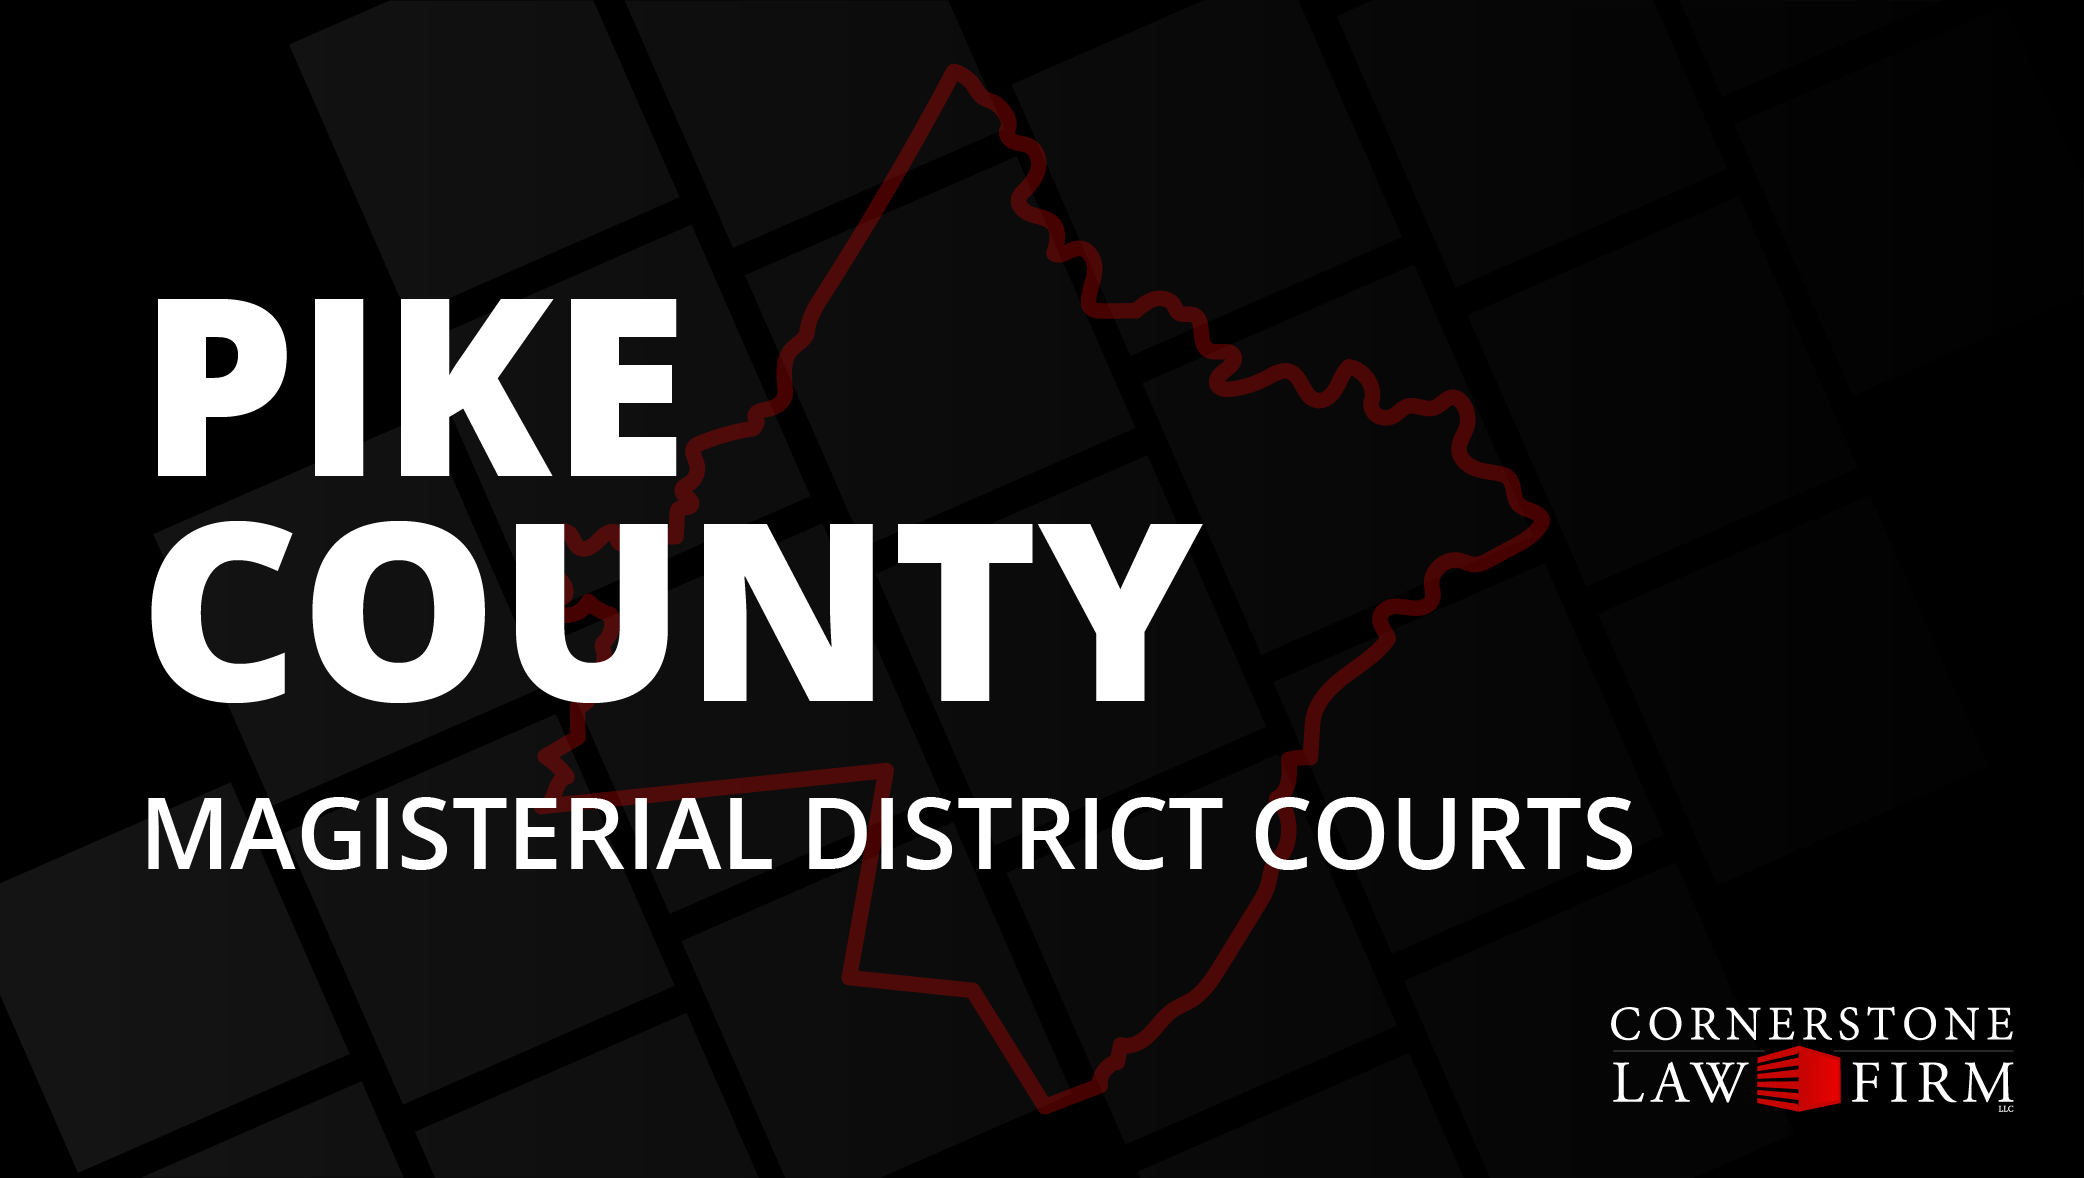 The words "Pike County Magisterial District Courts" over a black background with a faded red outline of the county.